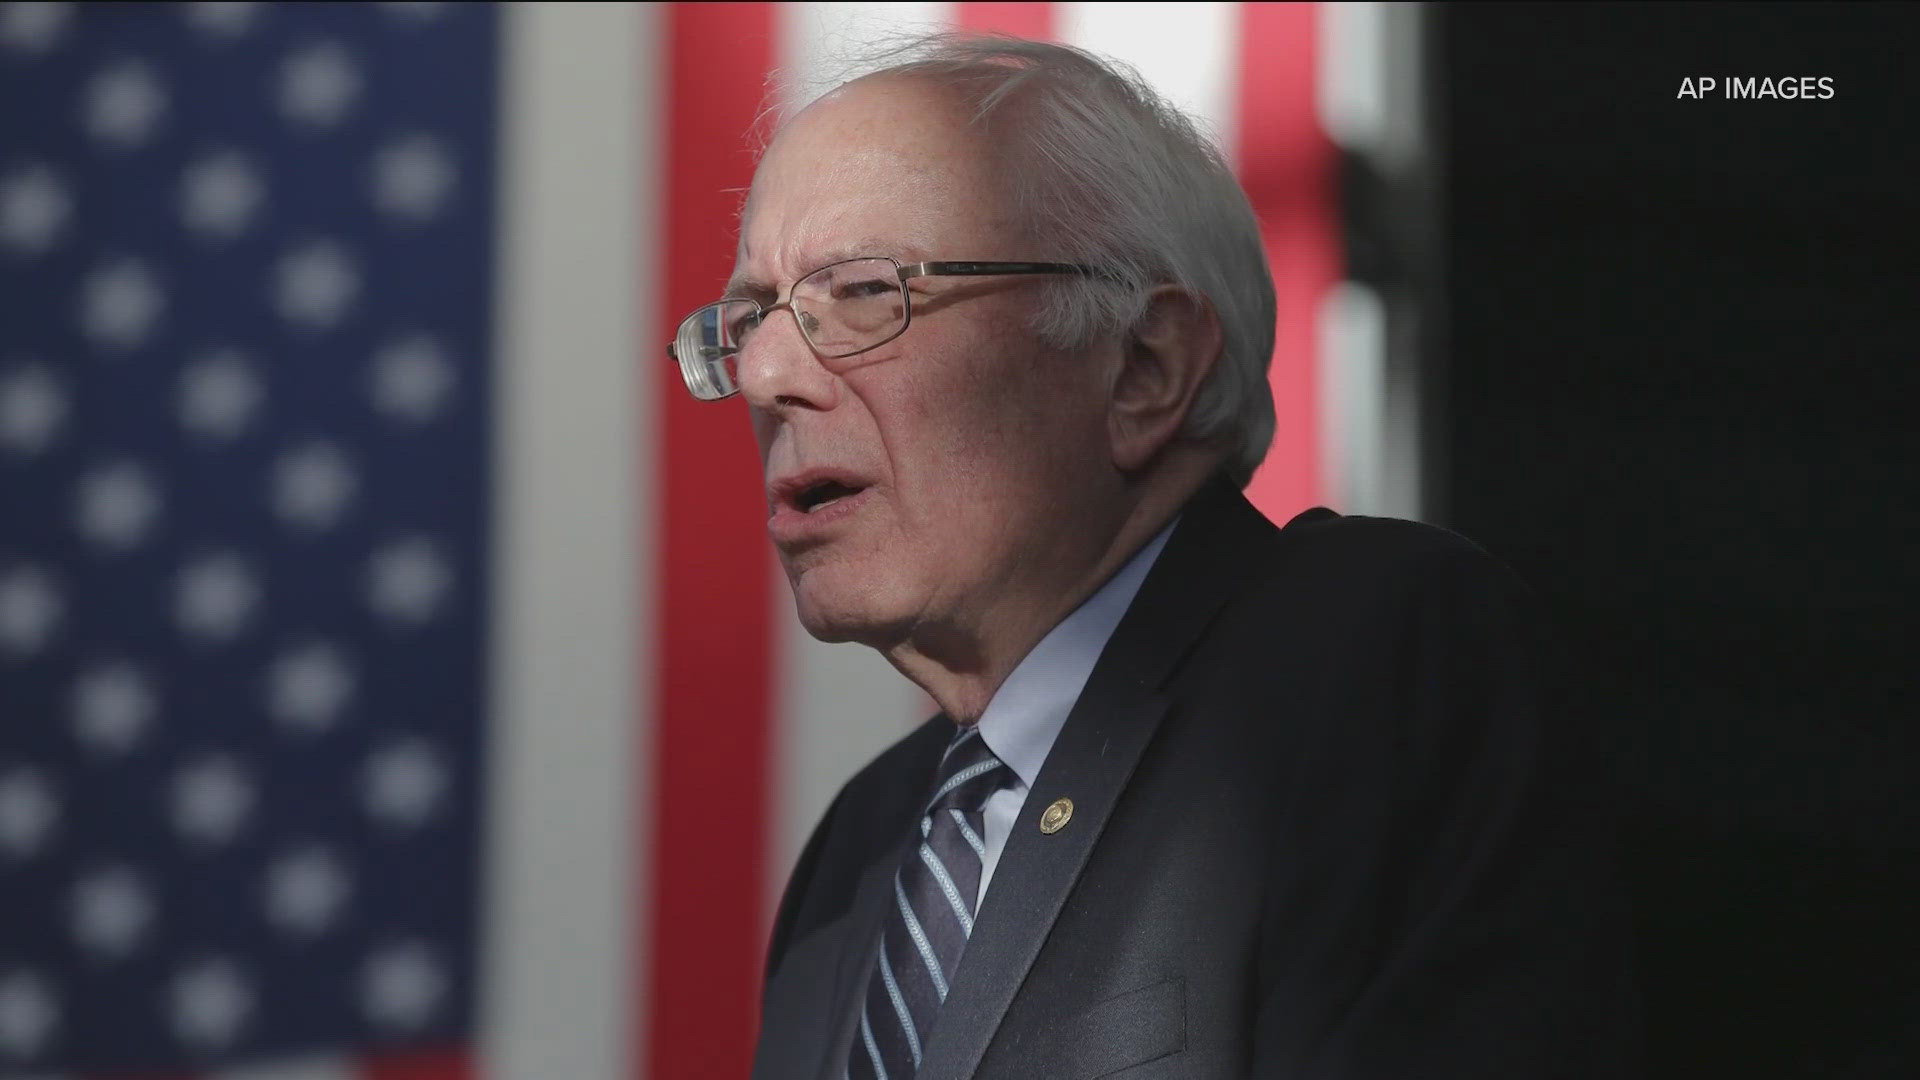 Sanders, who is 82 years old, said he is supporting President Joe Biden's campaign for reelection.